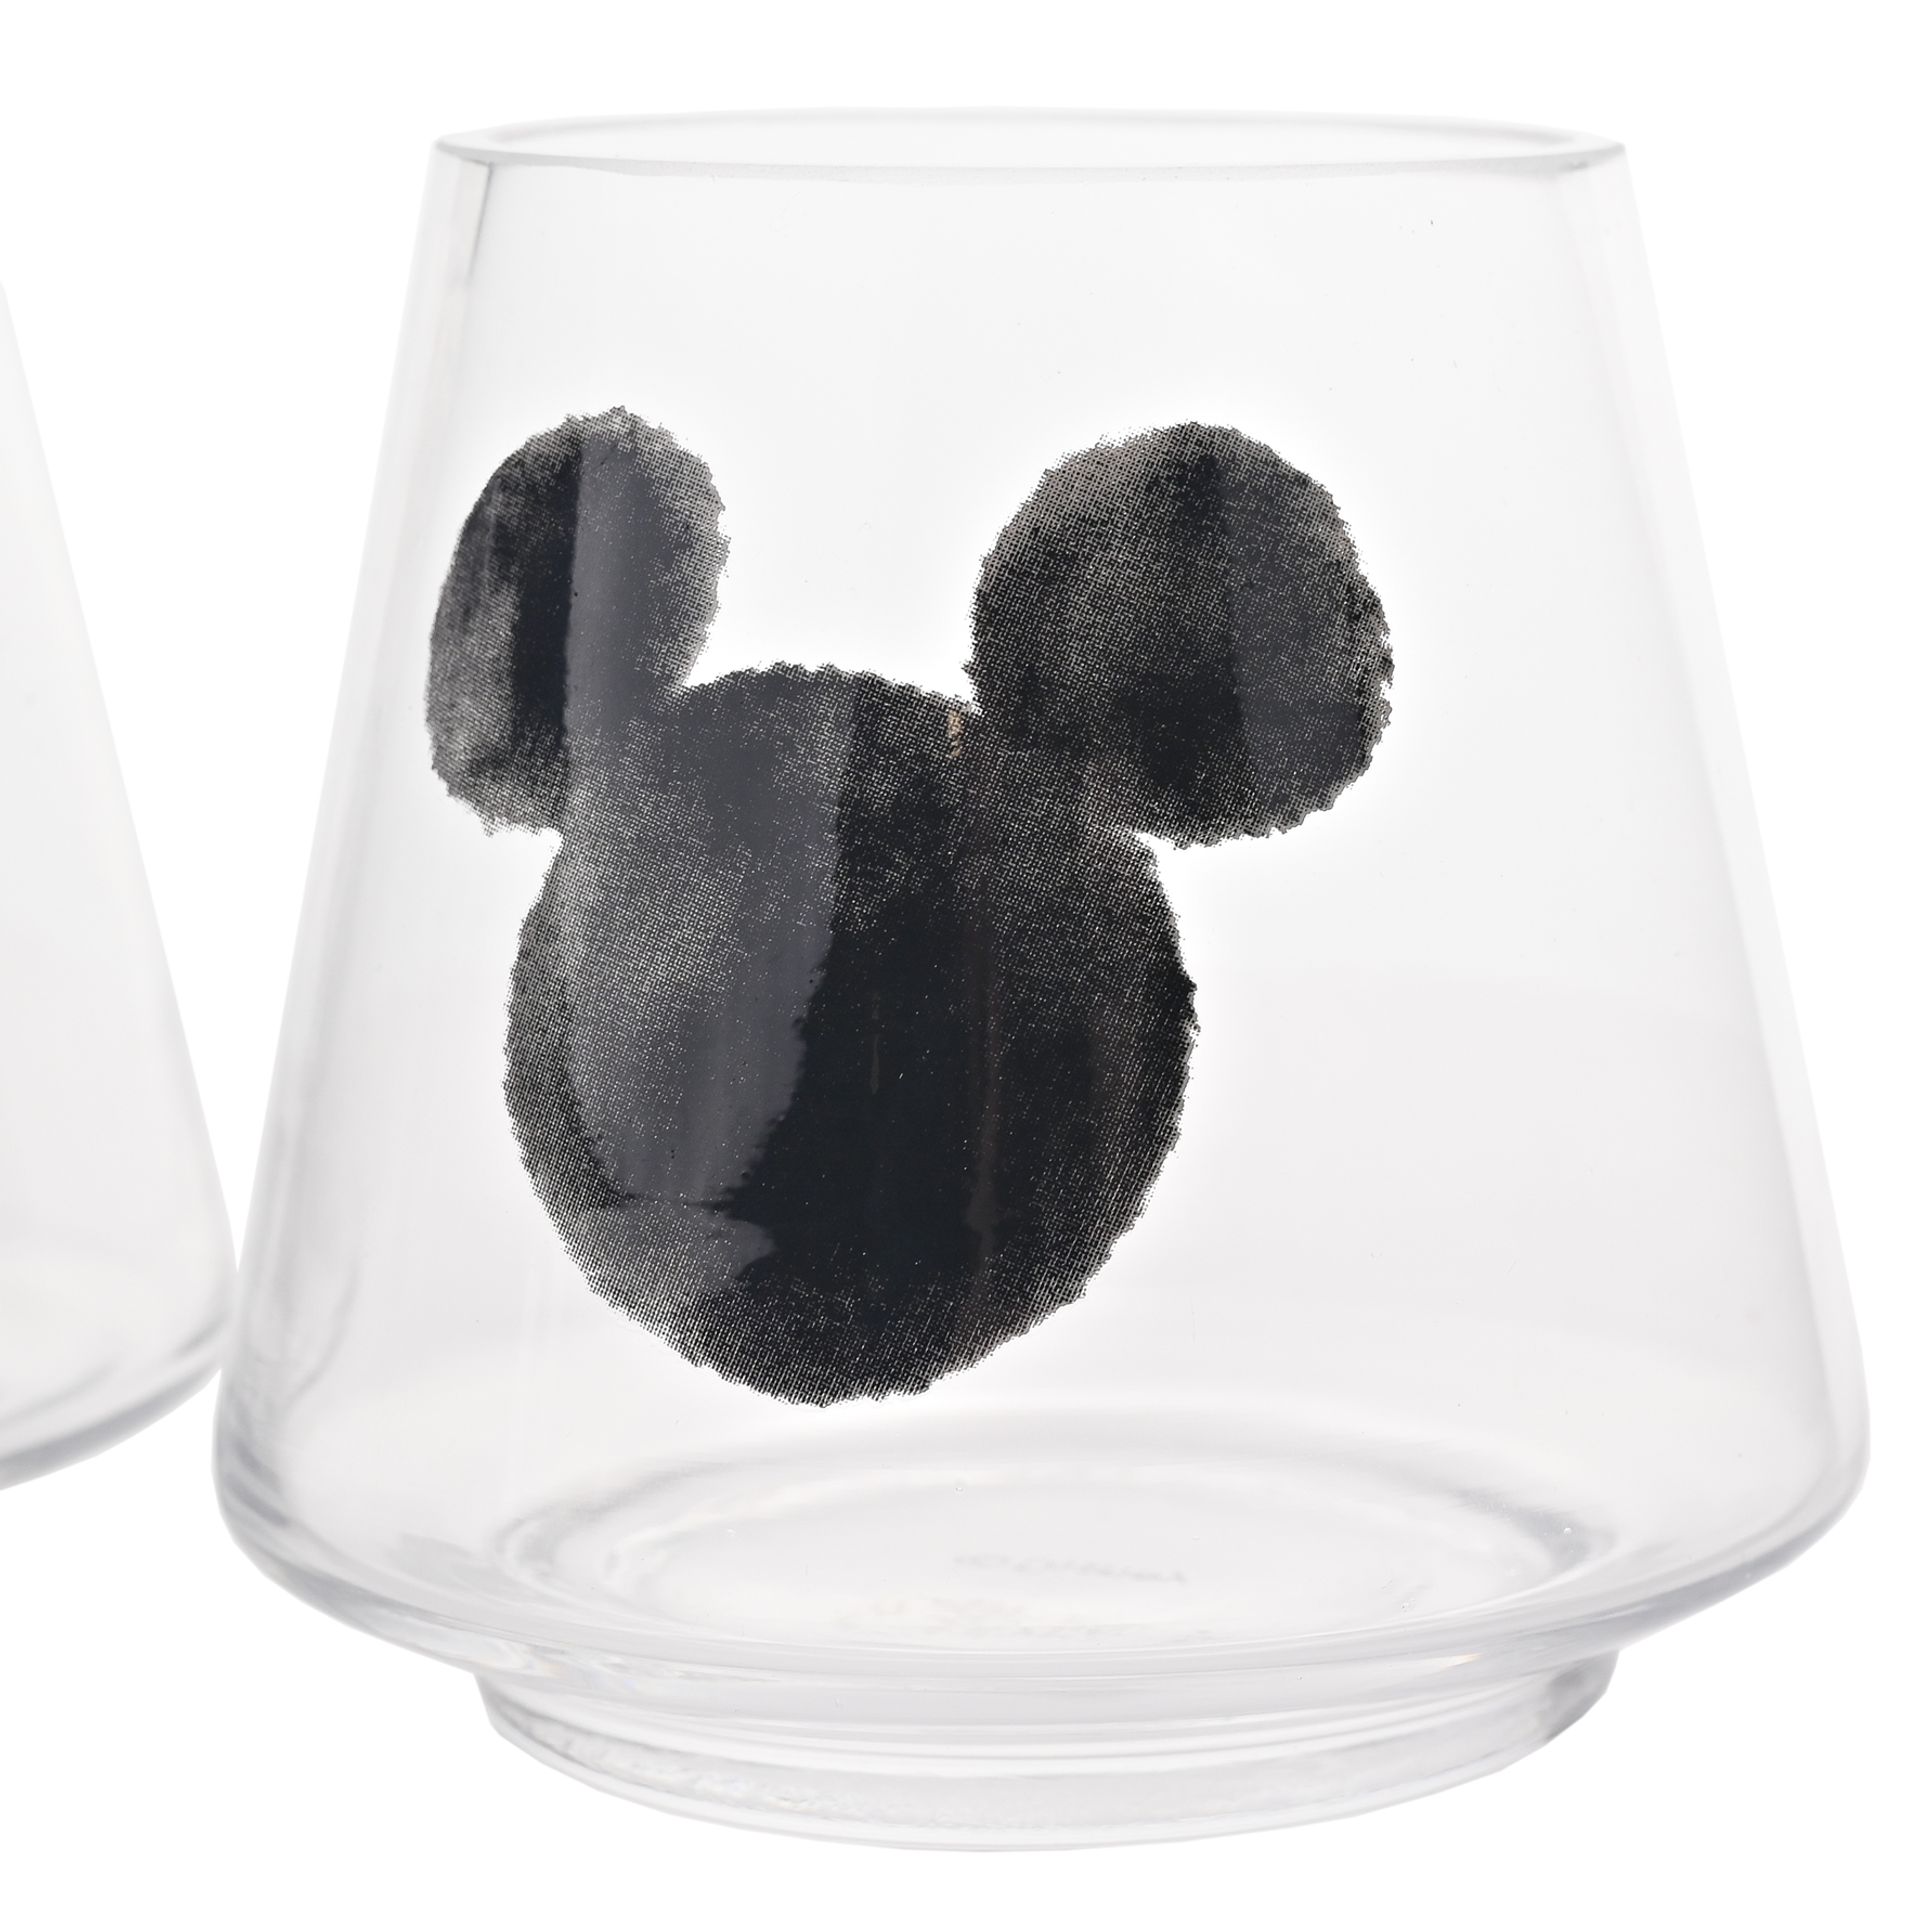 Mickey Mouse Fyrfadsstager, DISNEY MICKEY SHAPES SET OF 2 GLASS CANDLE HOLDERS, MIckey Mouse, Mickey Mouse bolig, Mickey Mouse boligindretning, Mickey Mouse Home, Disney figur, Disney figurer, alle Disney figurer, eventyrfigur, eventyrfigurer, eventyrlig figur, eventyrlige figurer, magisk figur, magiske figurer, , Disney shop, Disney butik, Disney butikDK, Disney butik I Danmark, Disney indretning, Disney mode, Disney Home, Disney Bolig, Disney interior, Disney,